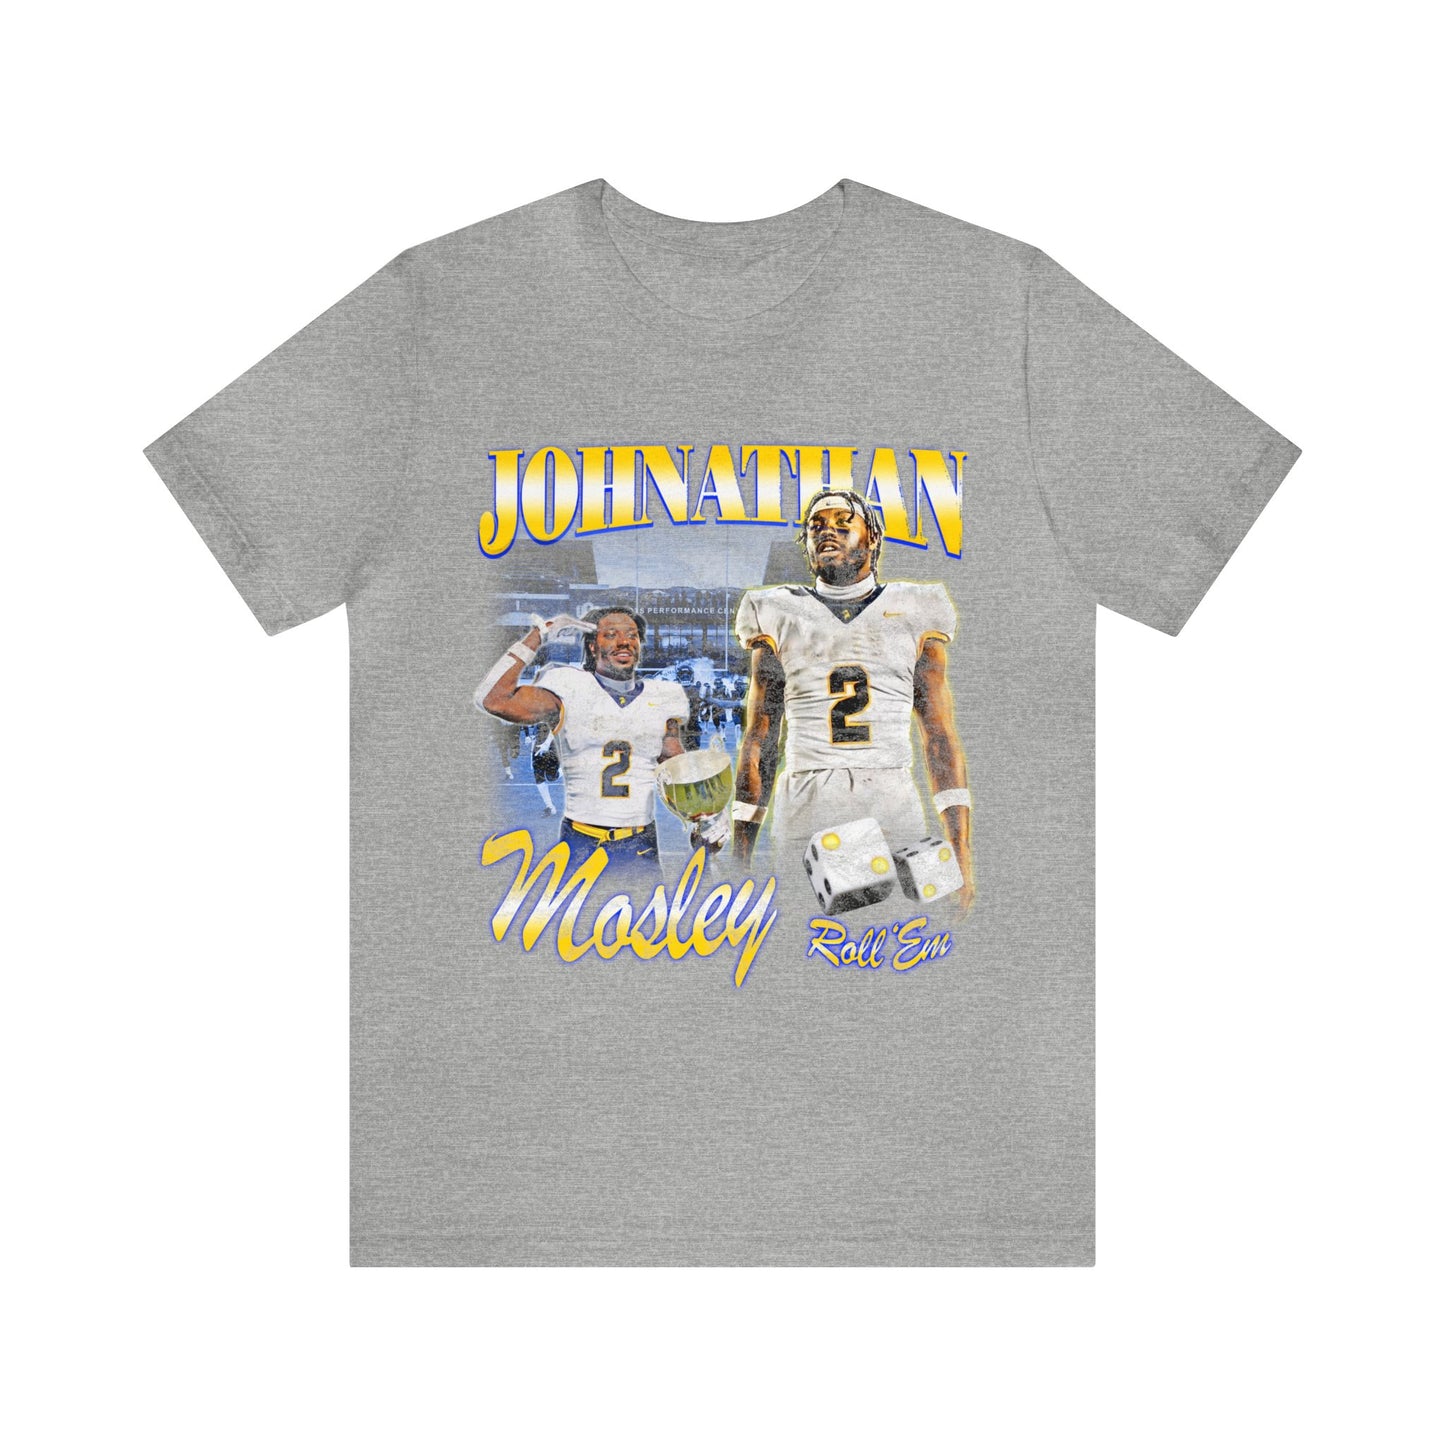 Johnathan Mosley: Essential Tee